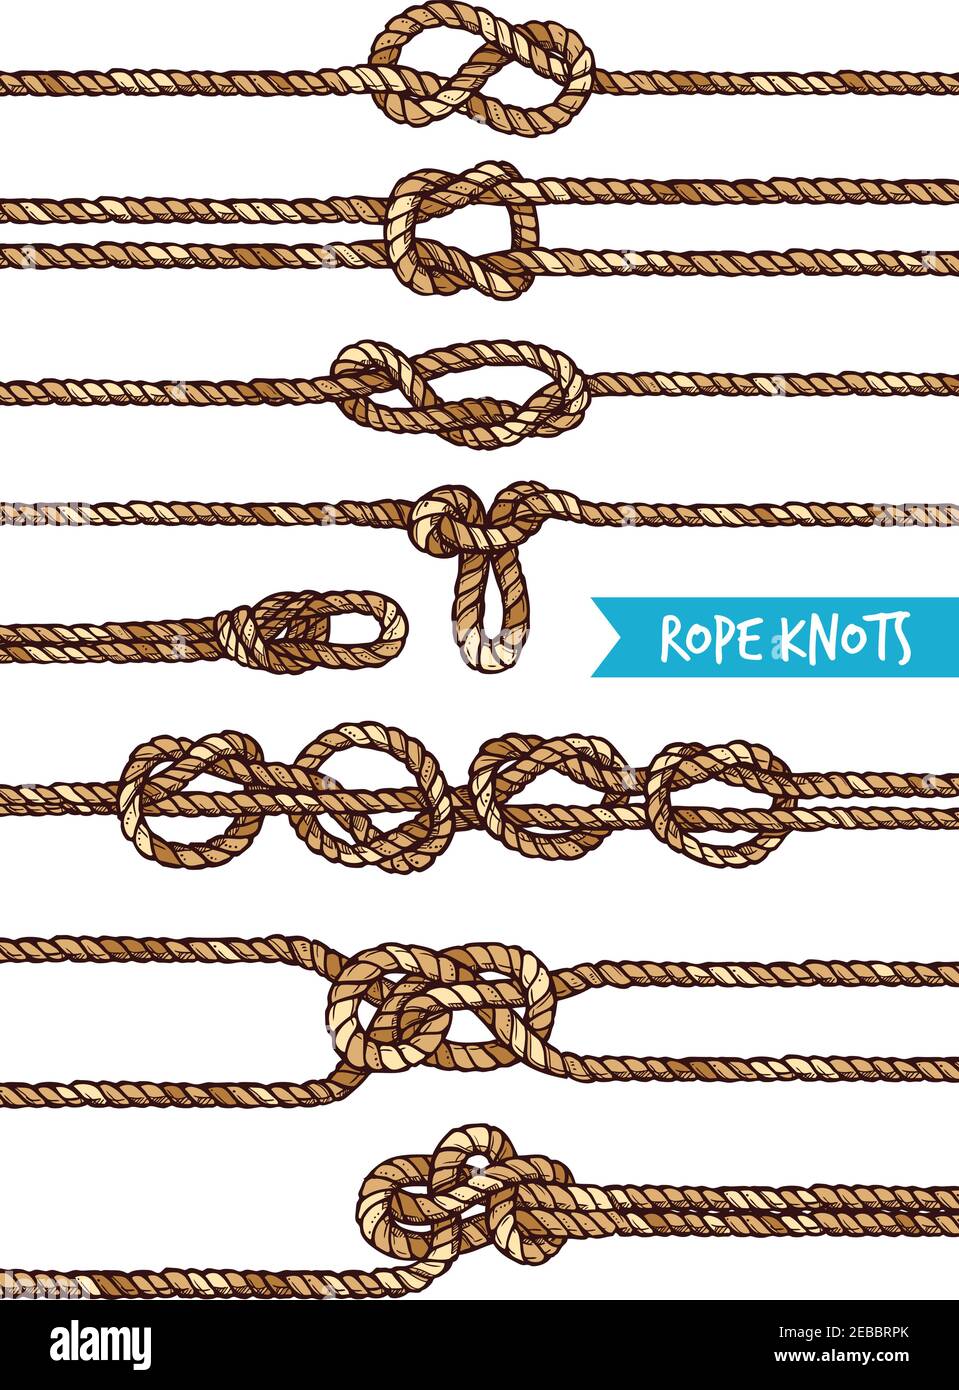 Rope knots set of different nodes and shapes in hand drawn style isolated vector illustration Stock Vector